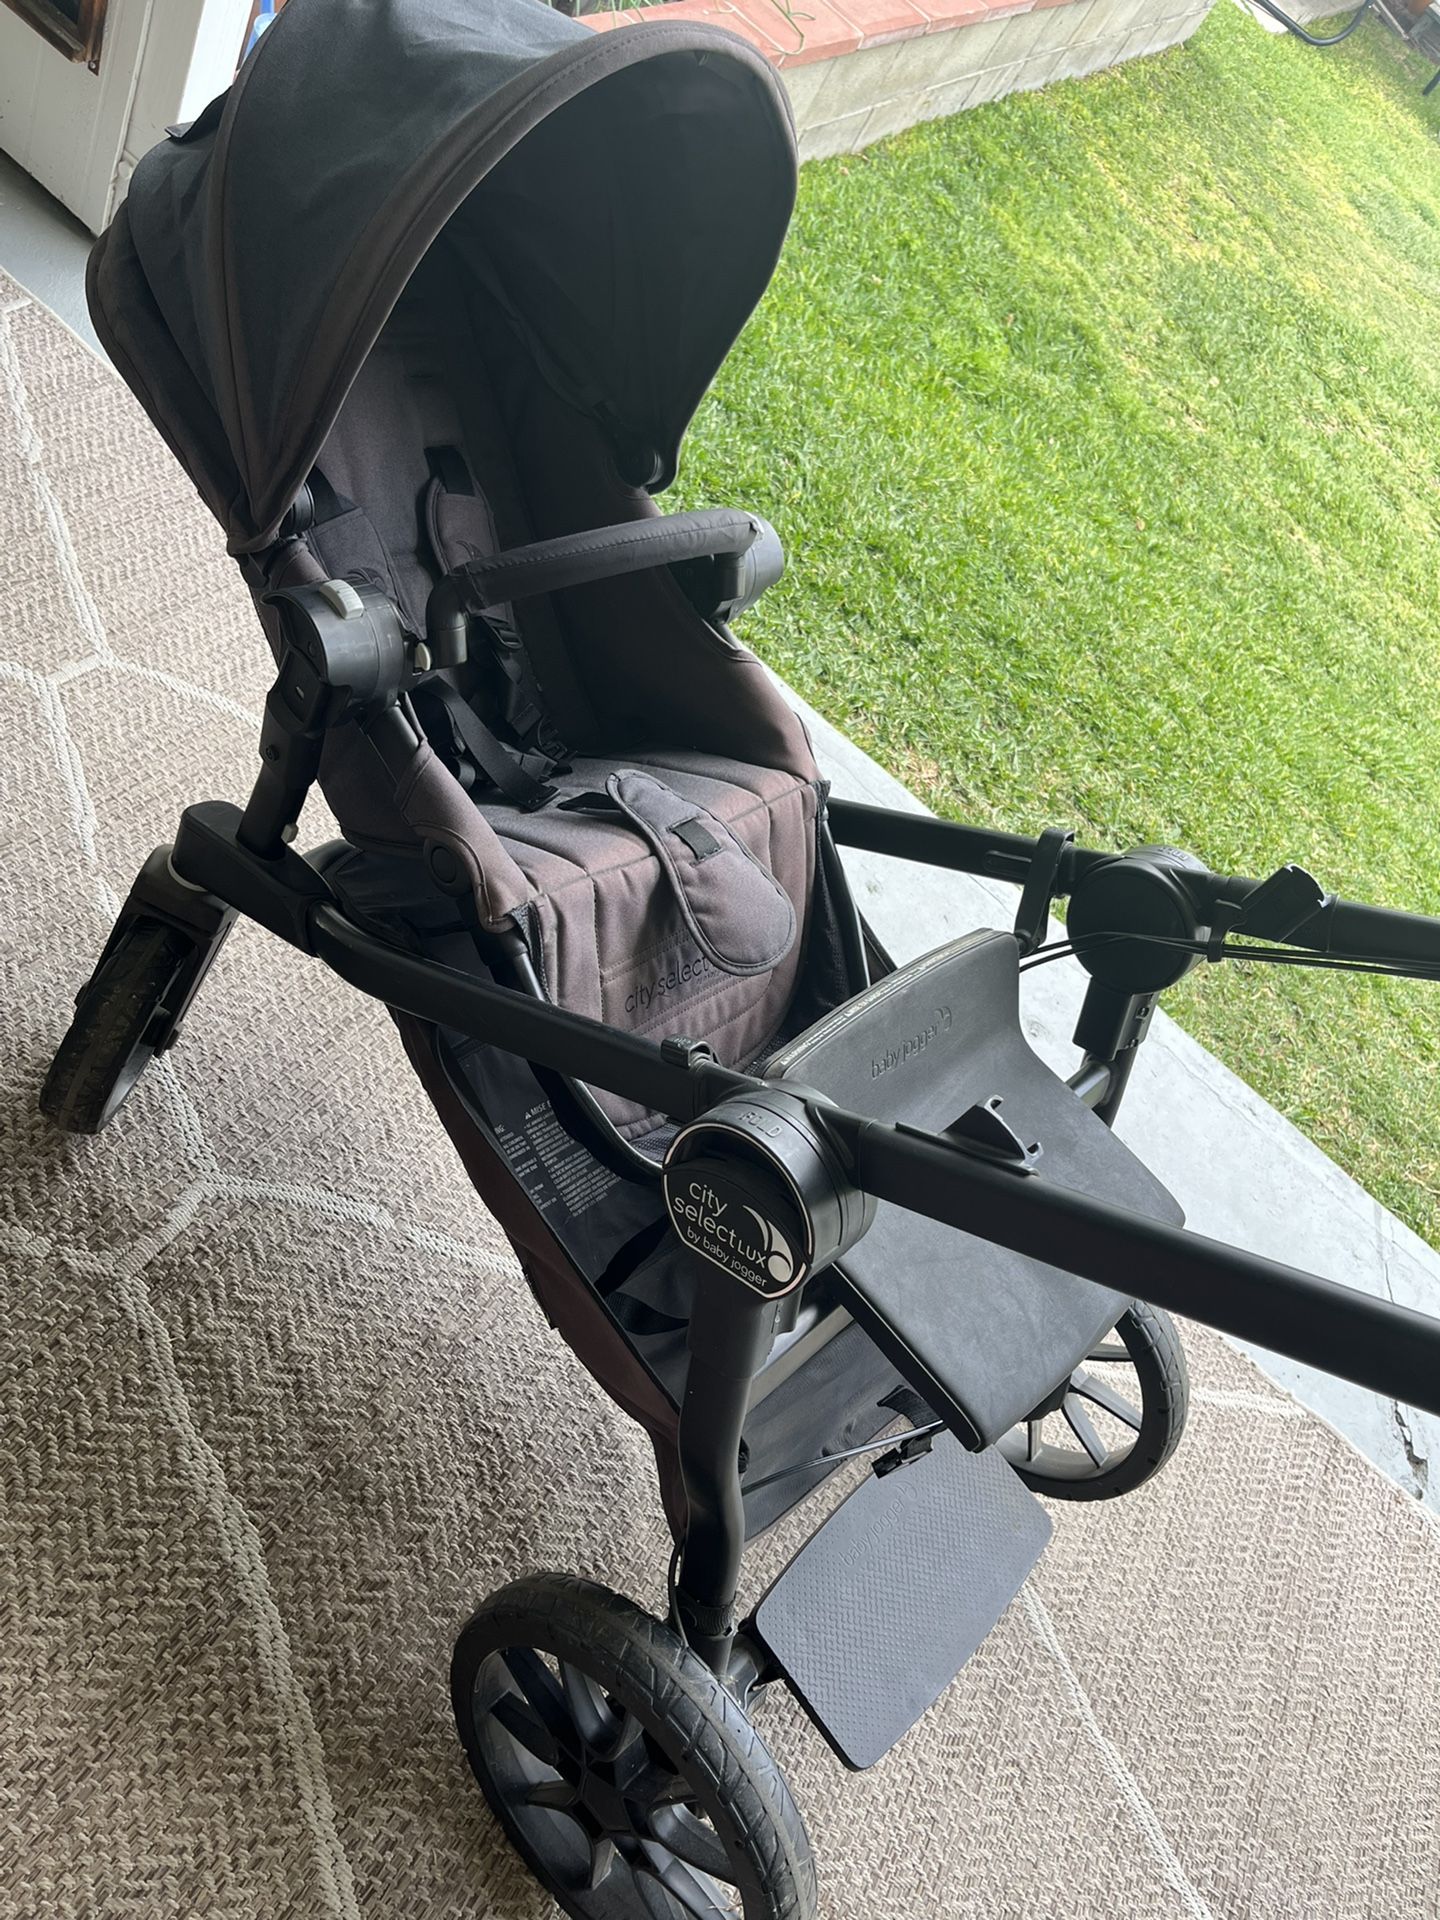 Baby Jogger City Select Lux for Sale in Whittier, - OfferUp